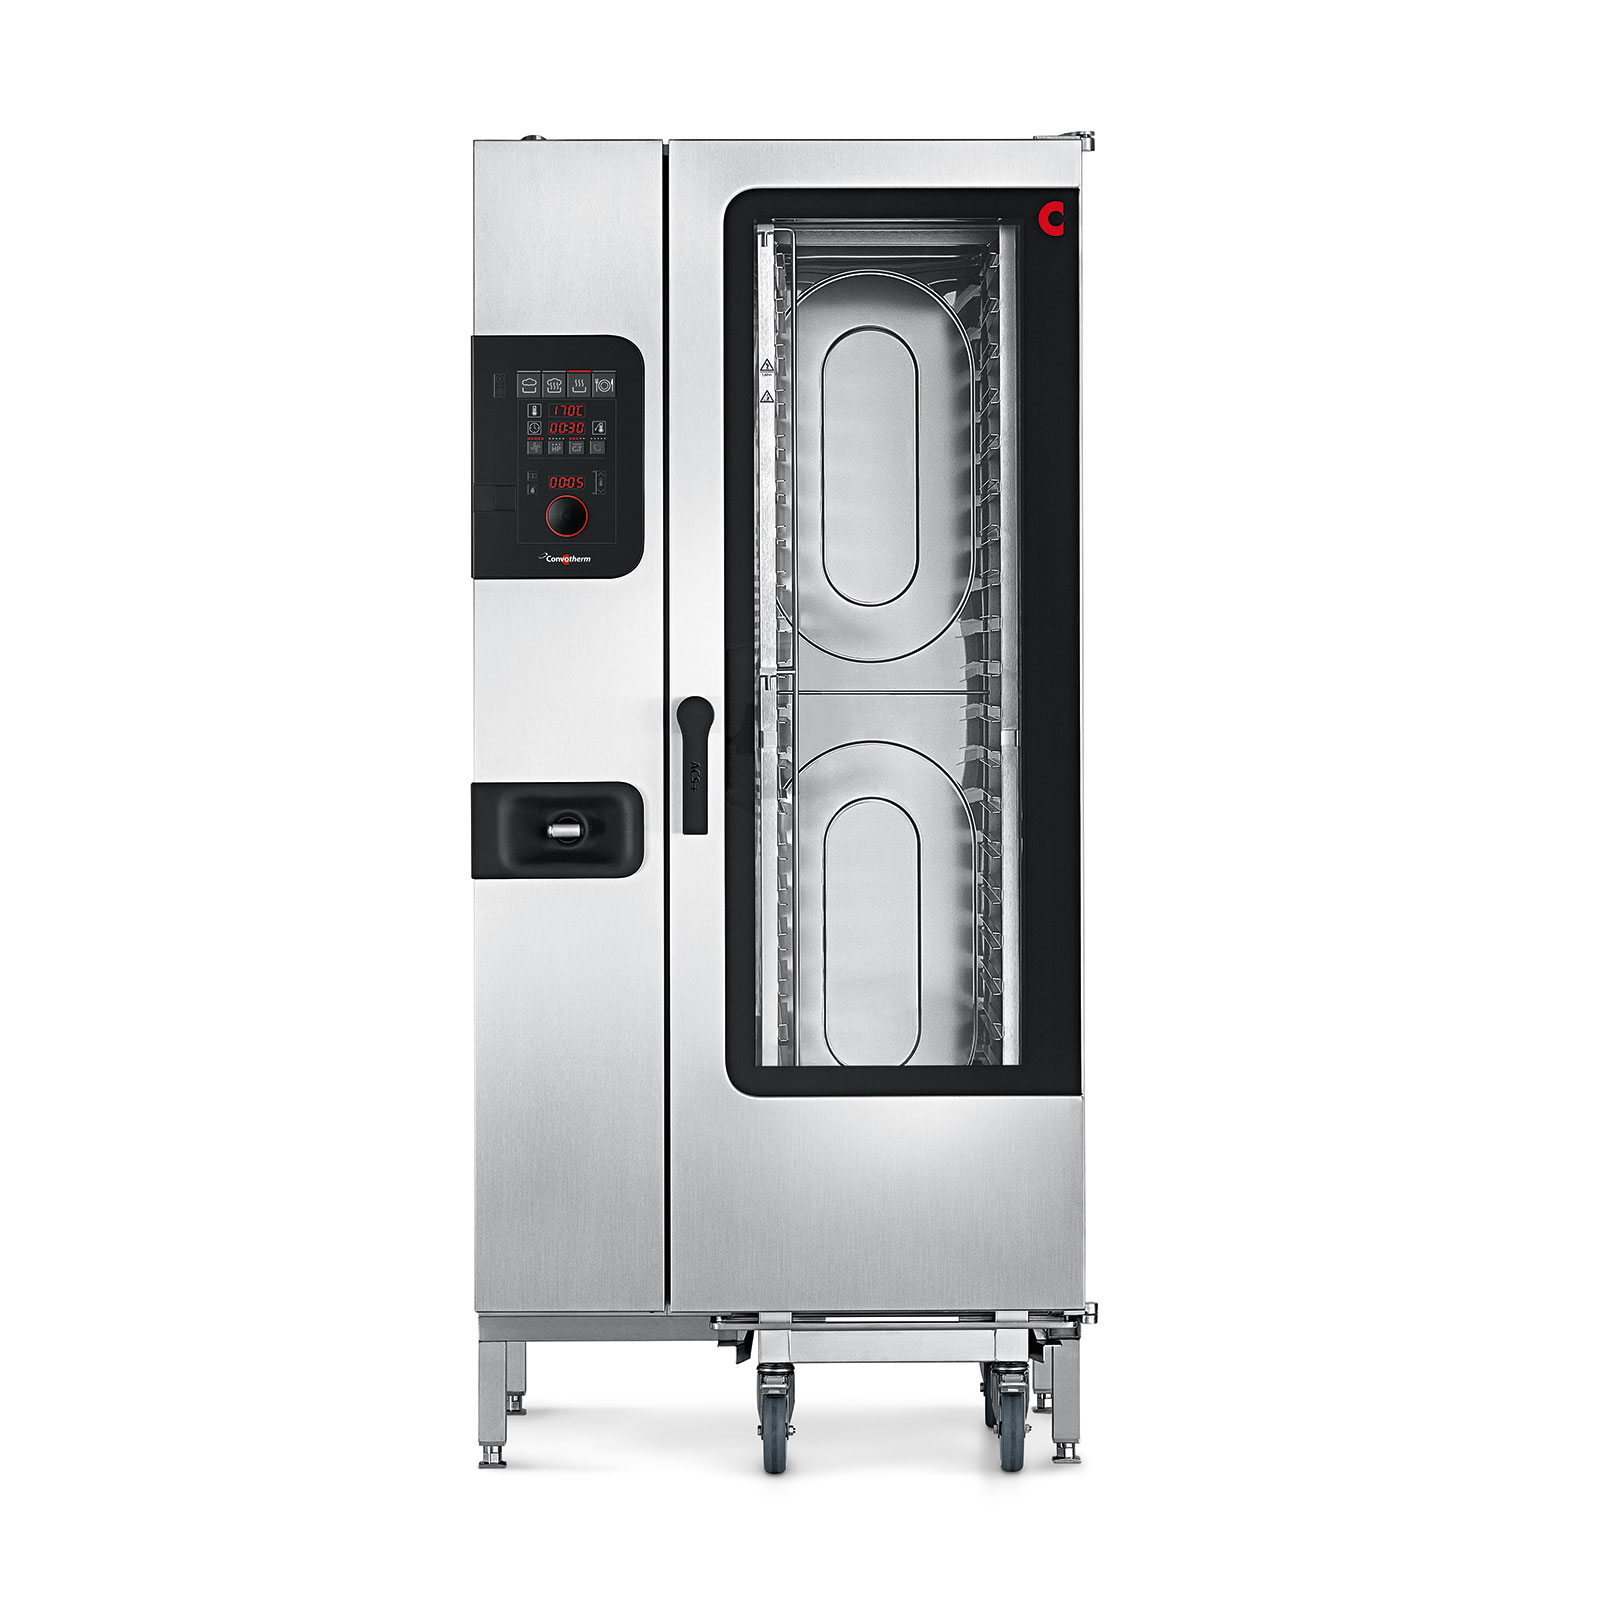 Convotherm C4 ED 20.10GB Half- Size Gas Combi Oven w/ Programmable Controls, Steam Generator